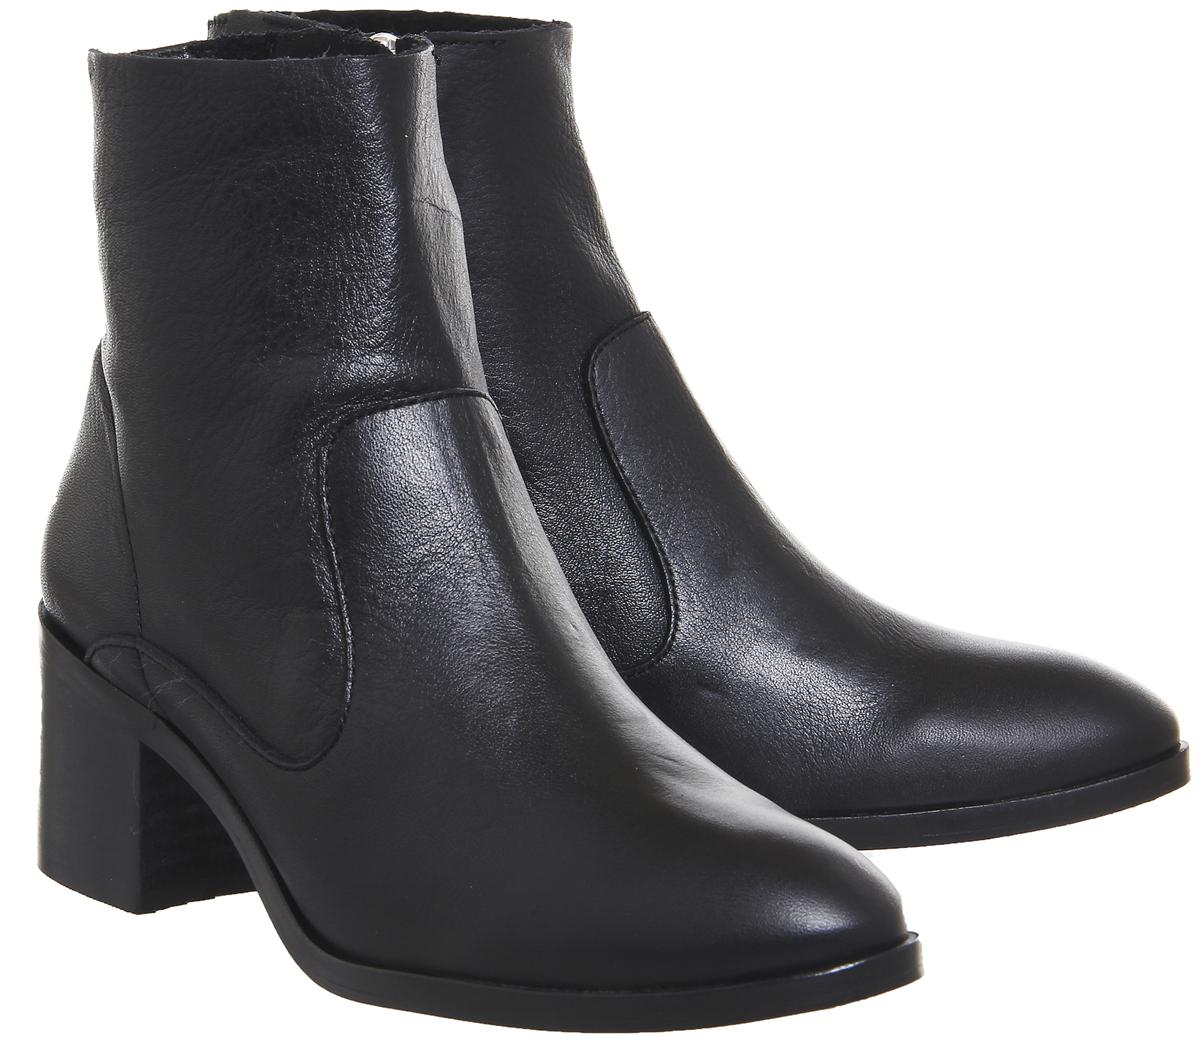 Office Albury Block Heel Boots Black Leather - Ankle Boots